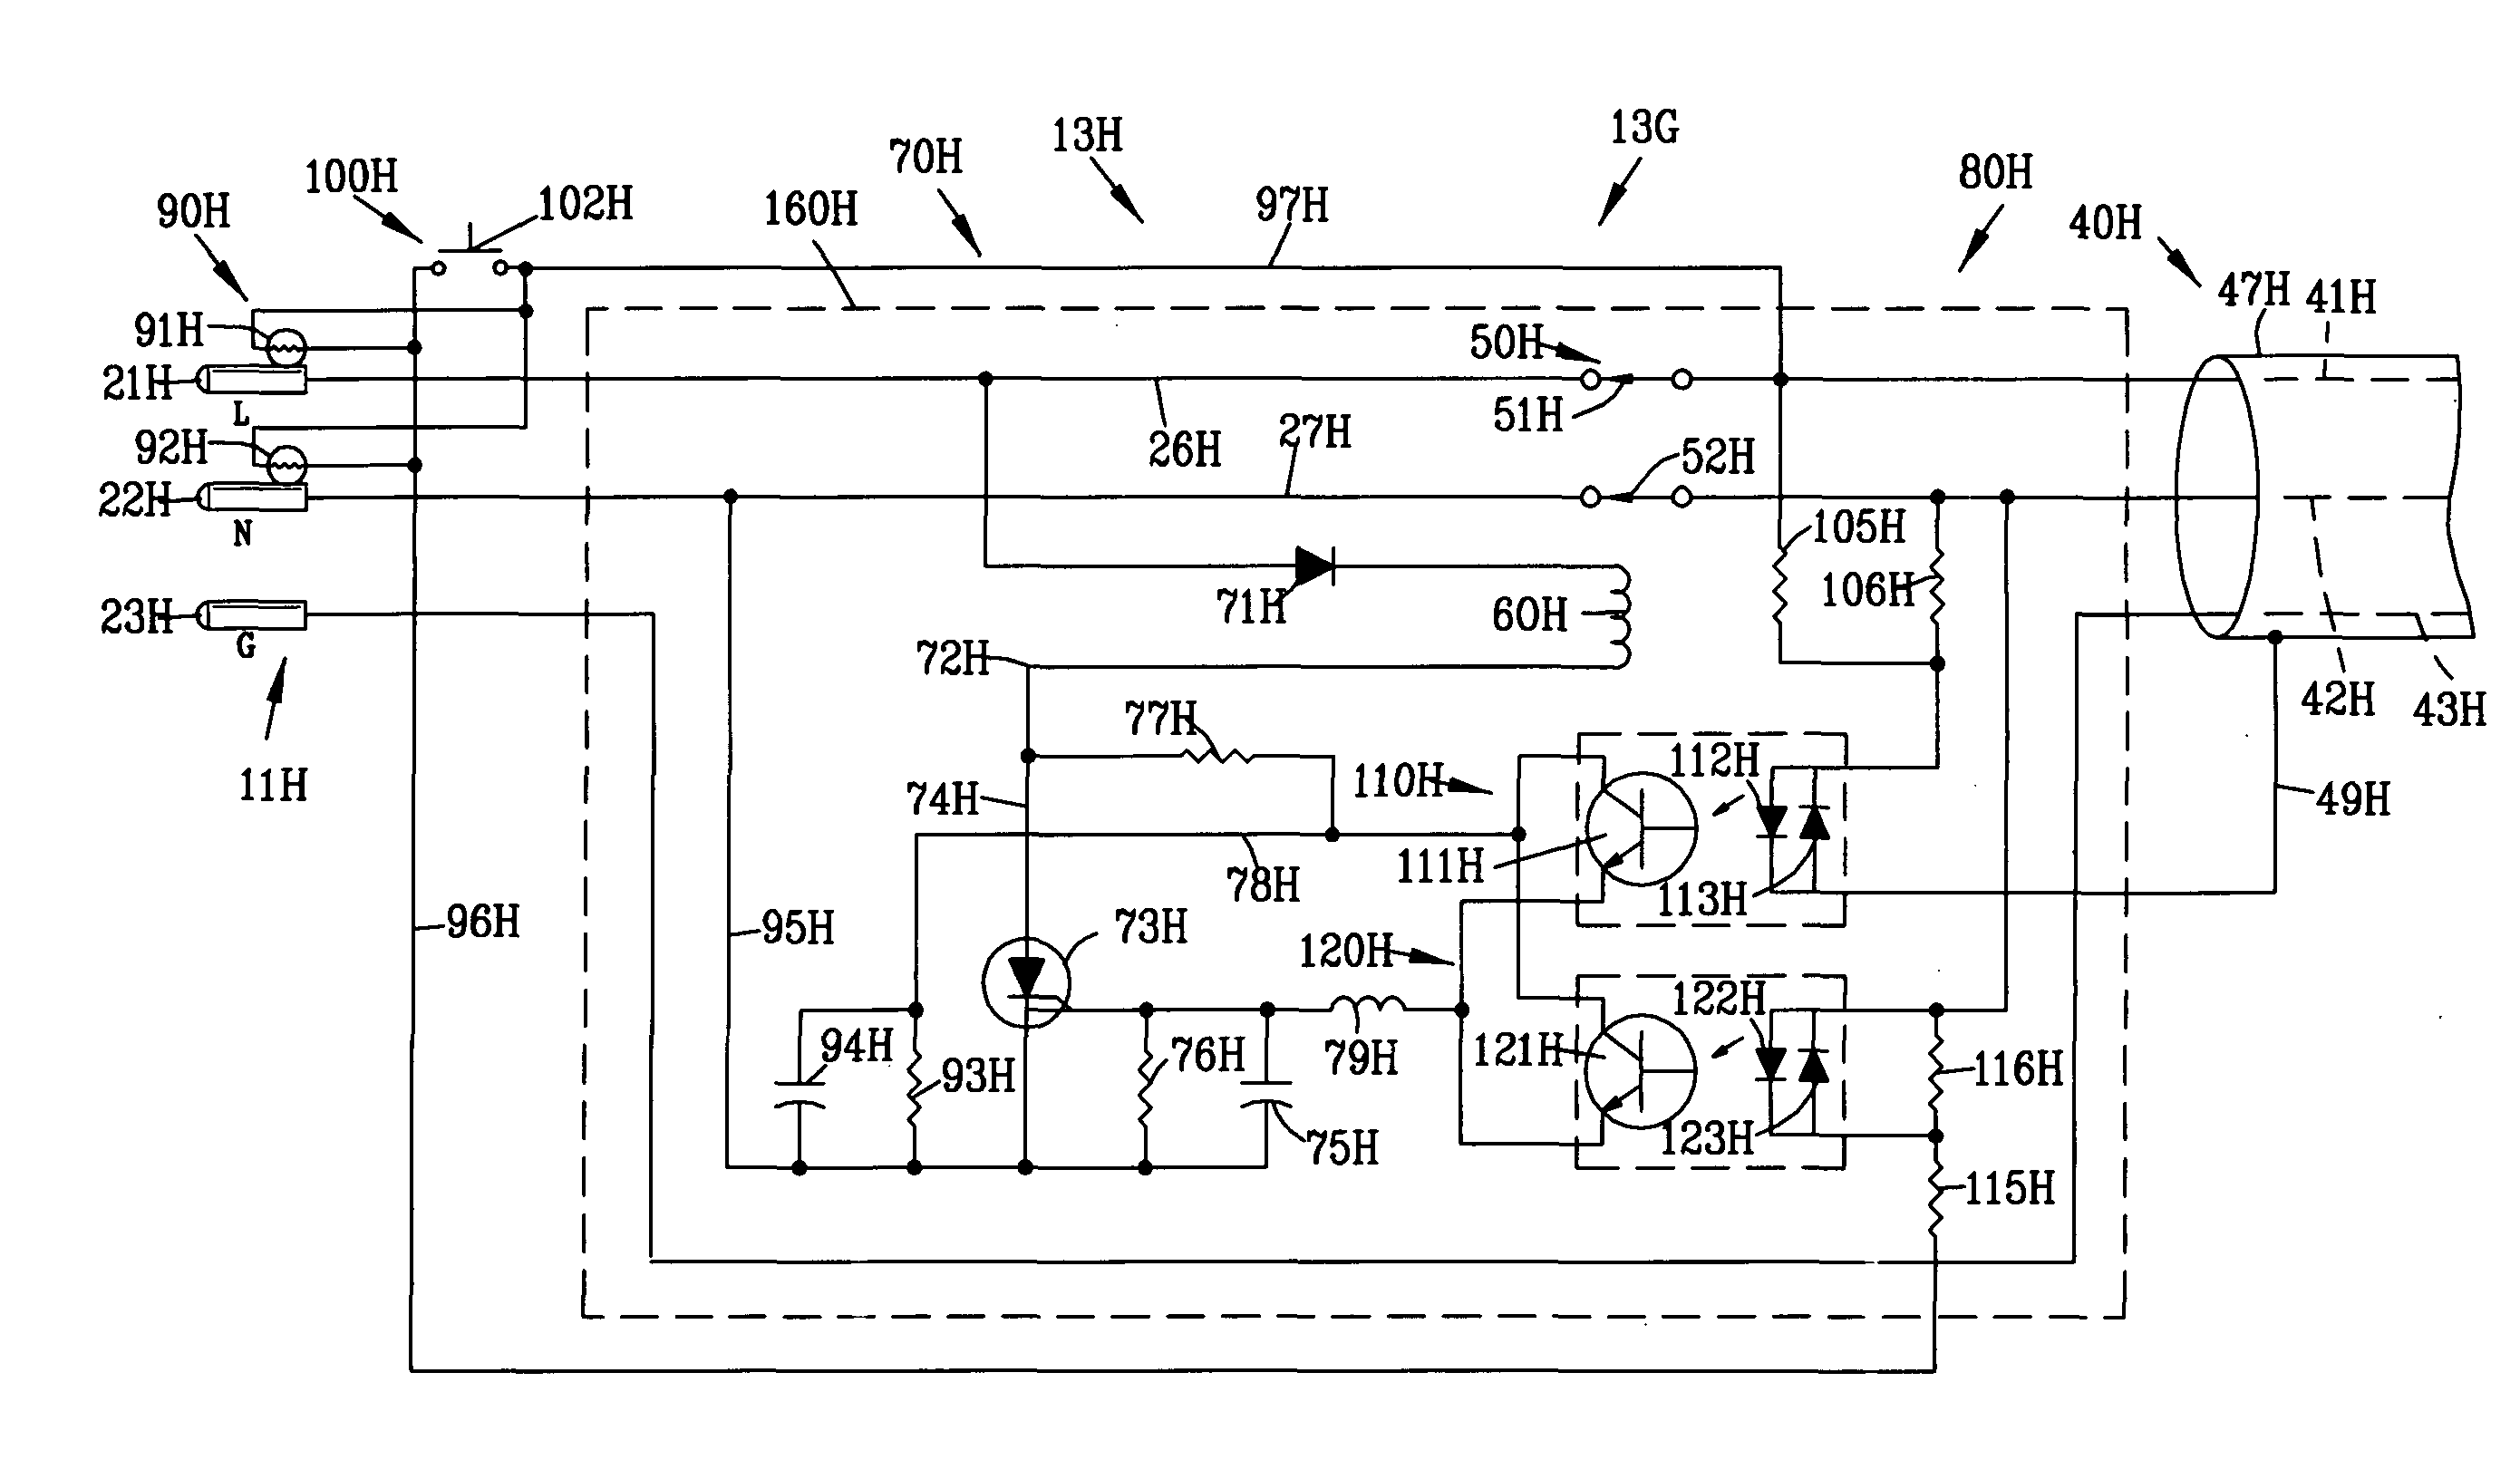 Over heating detection and interrupter circuit